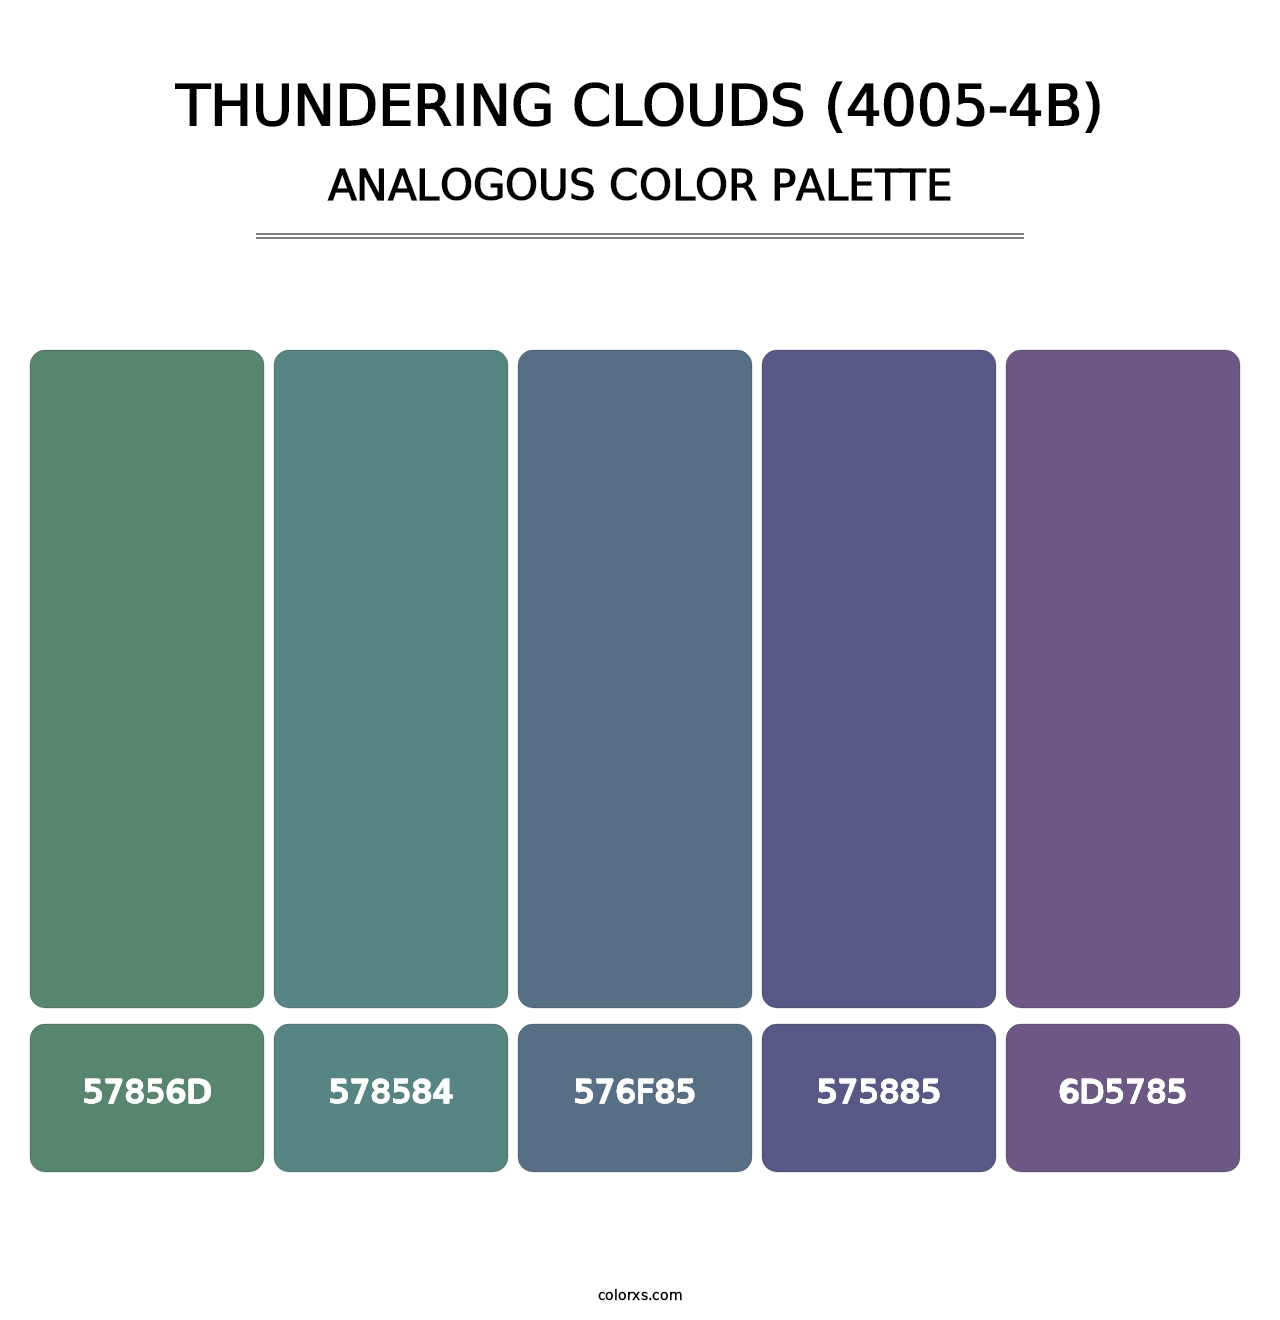 Thundering Clouds (4005-4B) - Analogous Color Palette